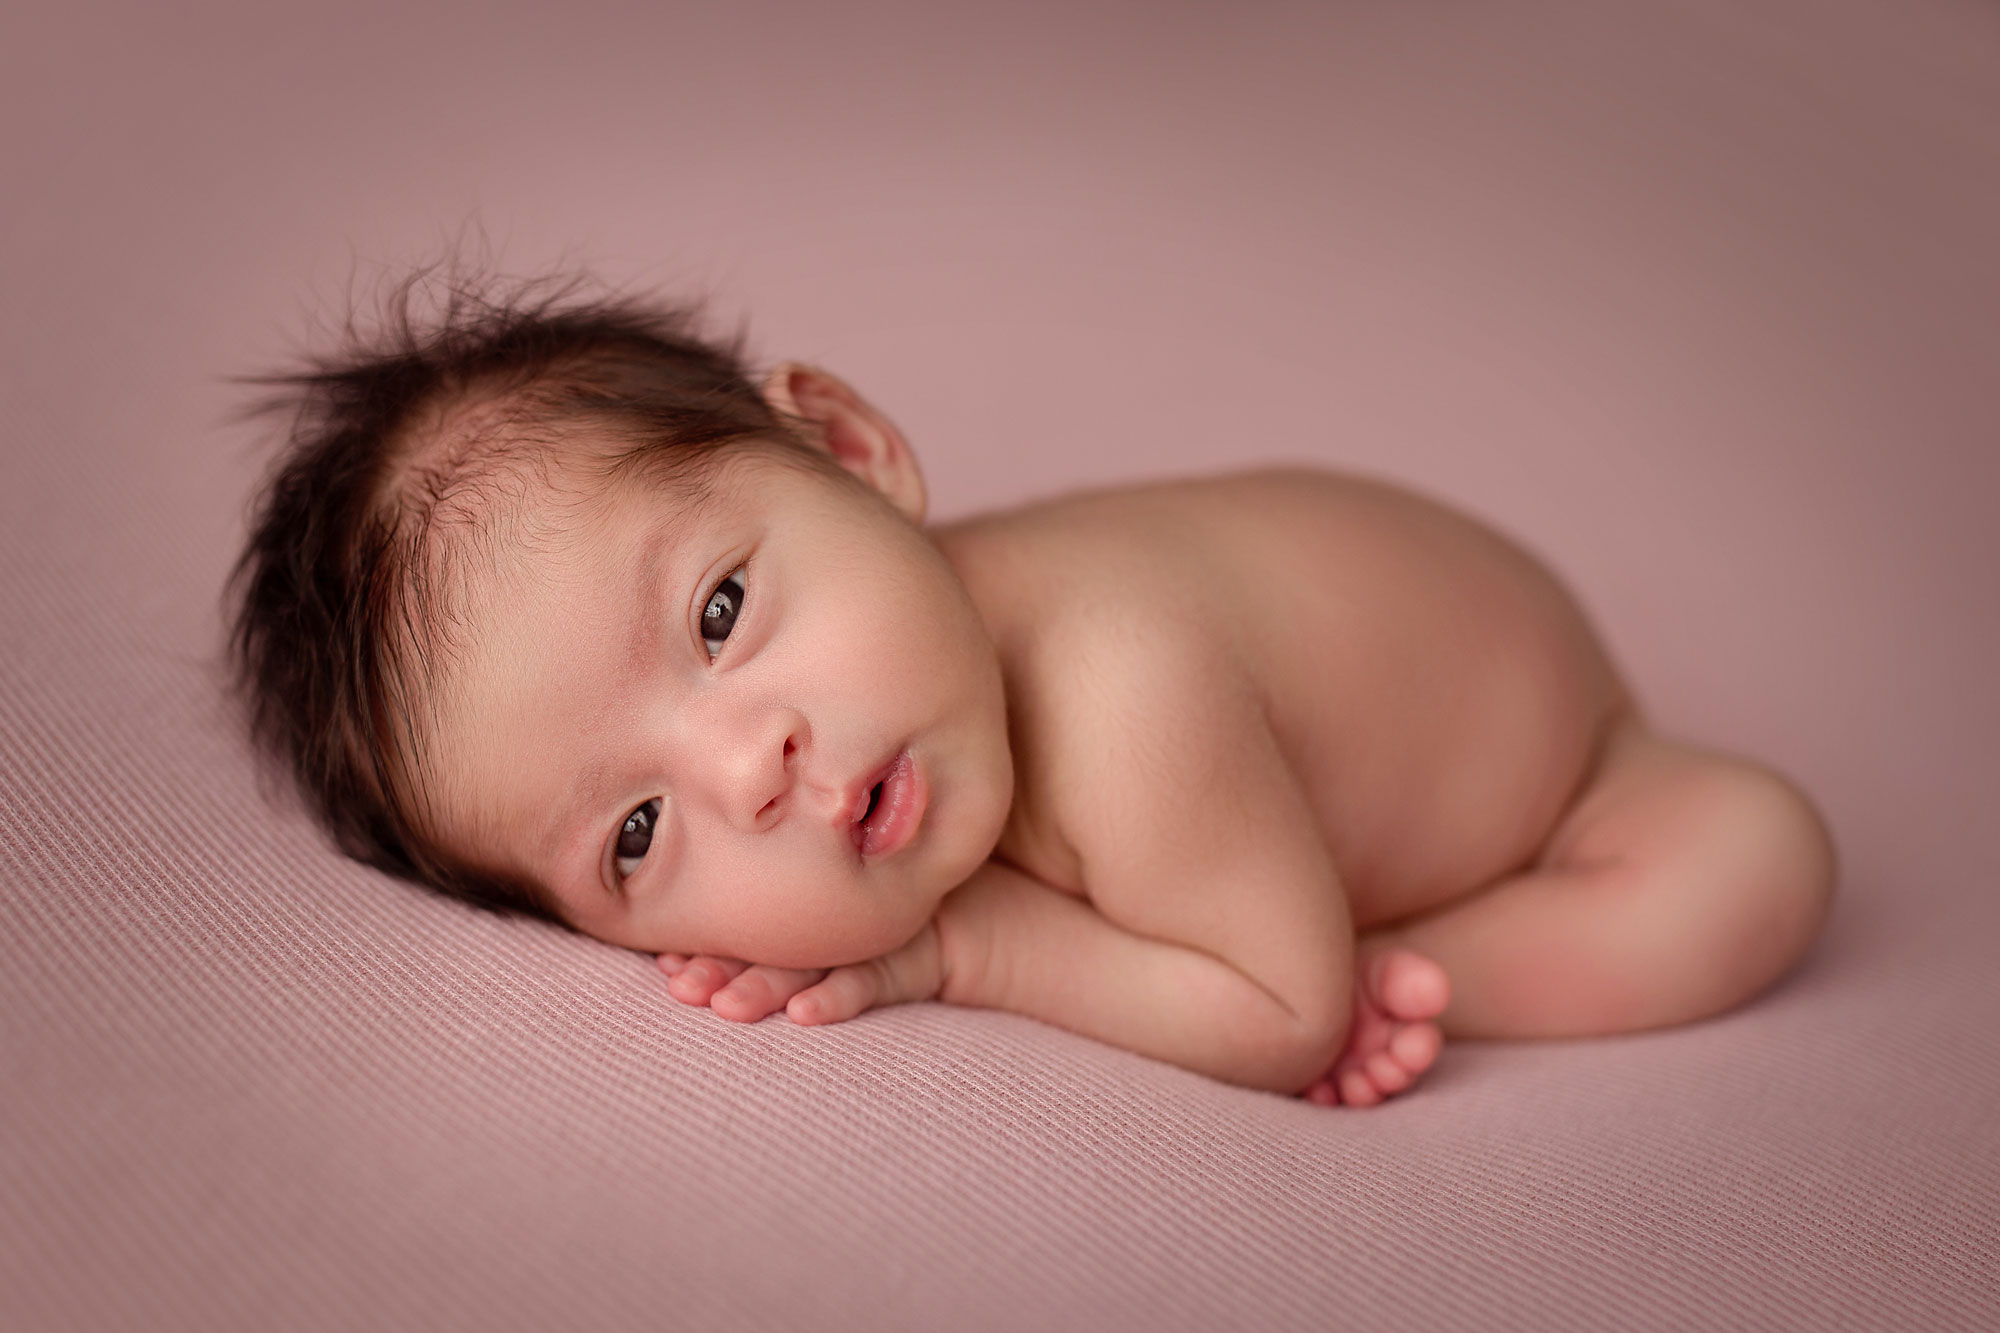 awake baby girl newborn photography session posed beanbag pose on a pink blanket 